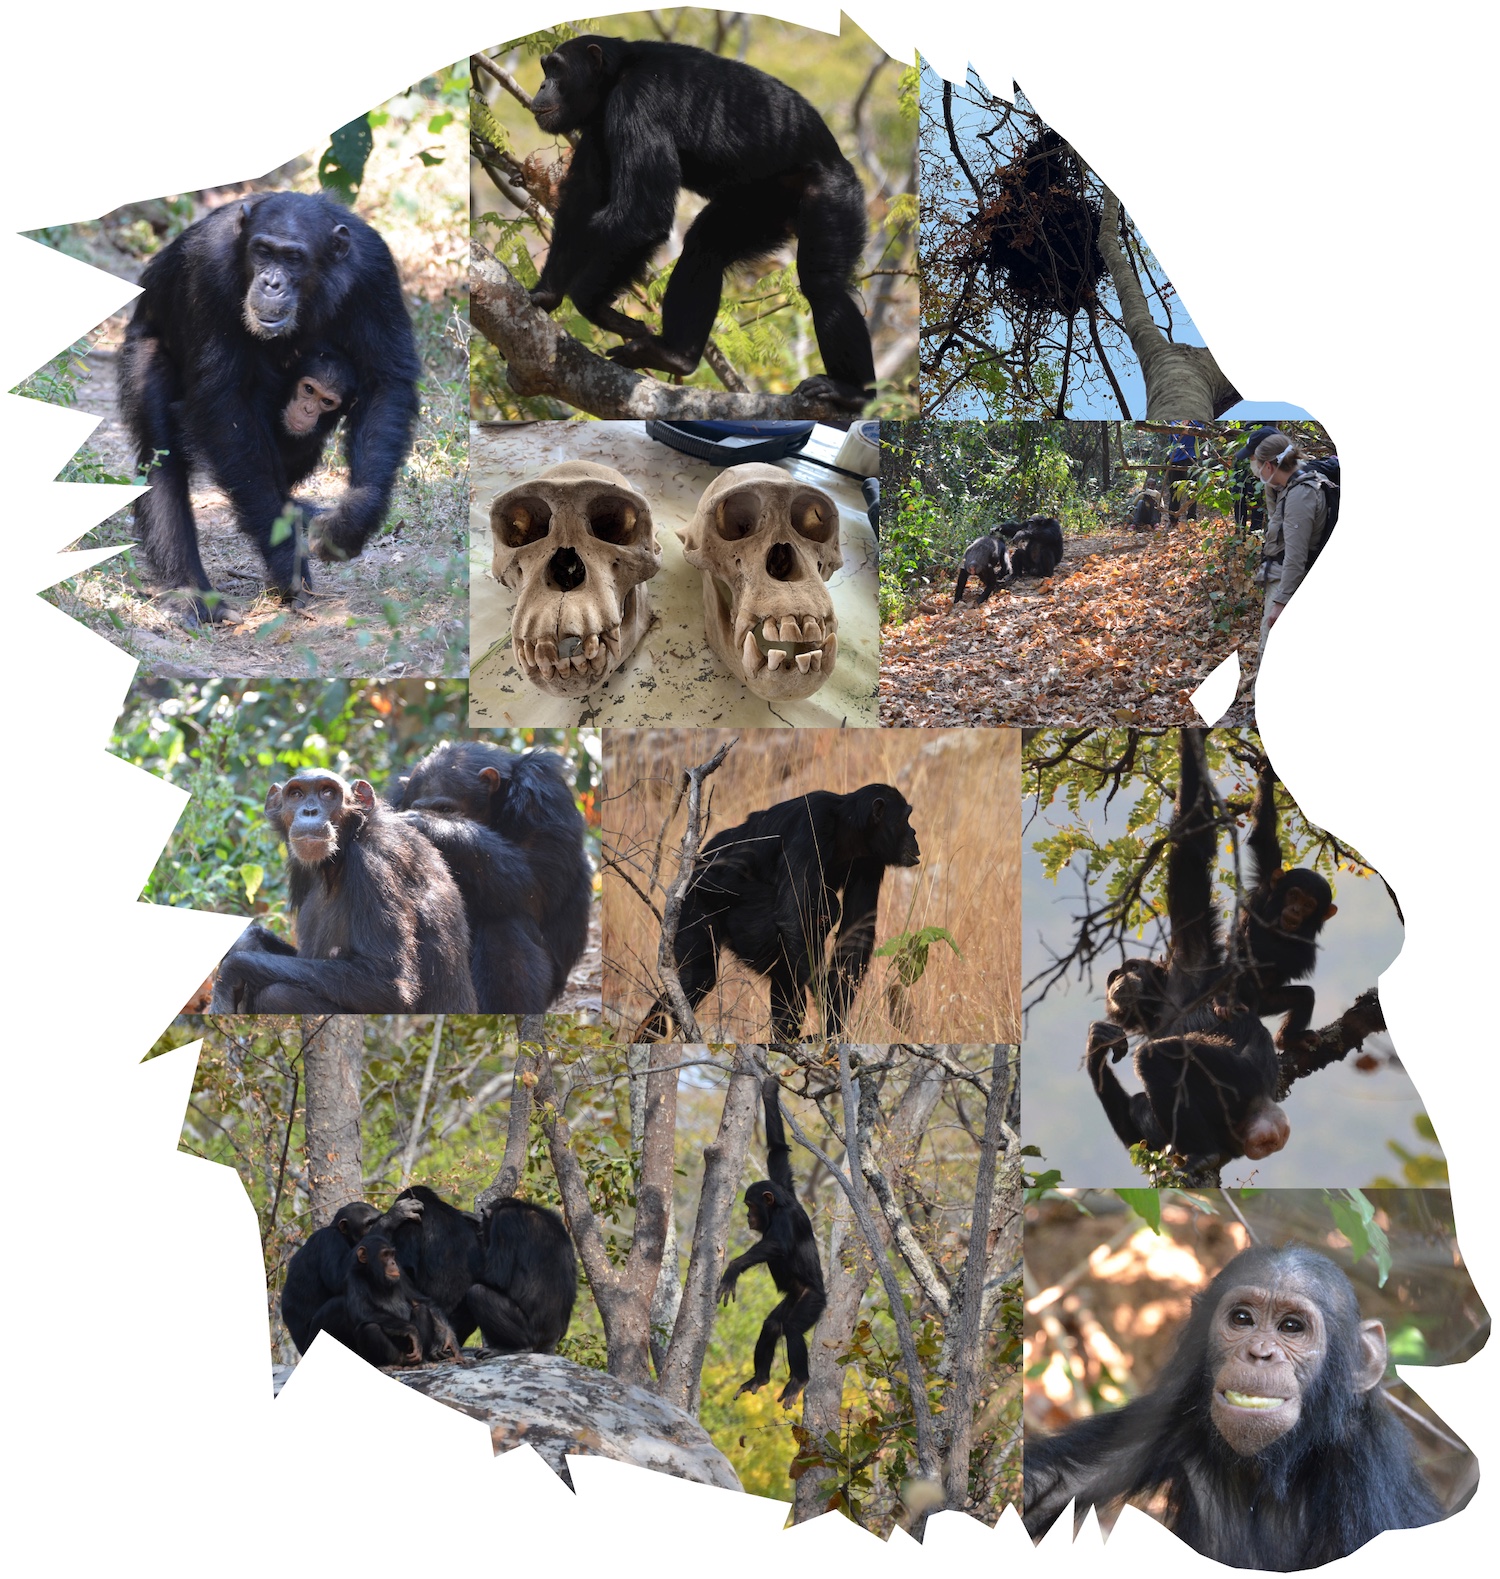 Chimpanzees of East Africa